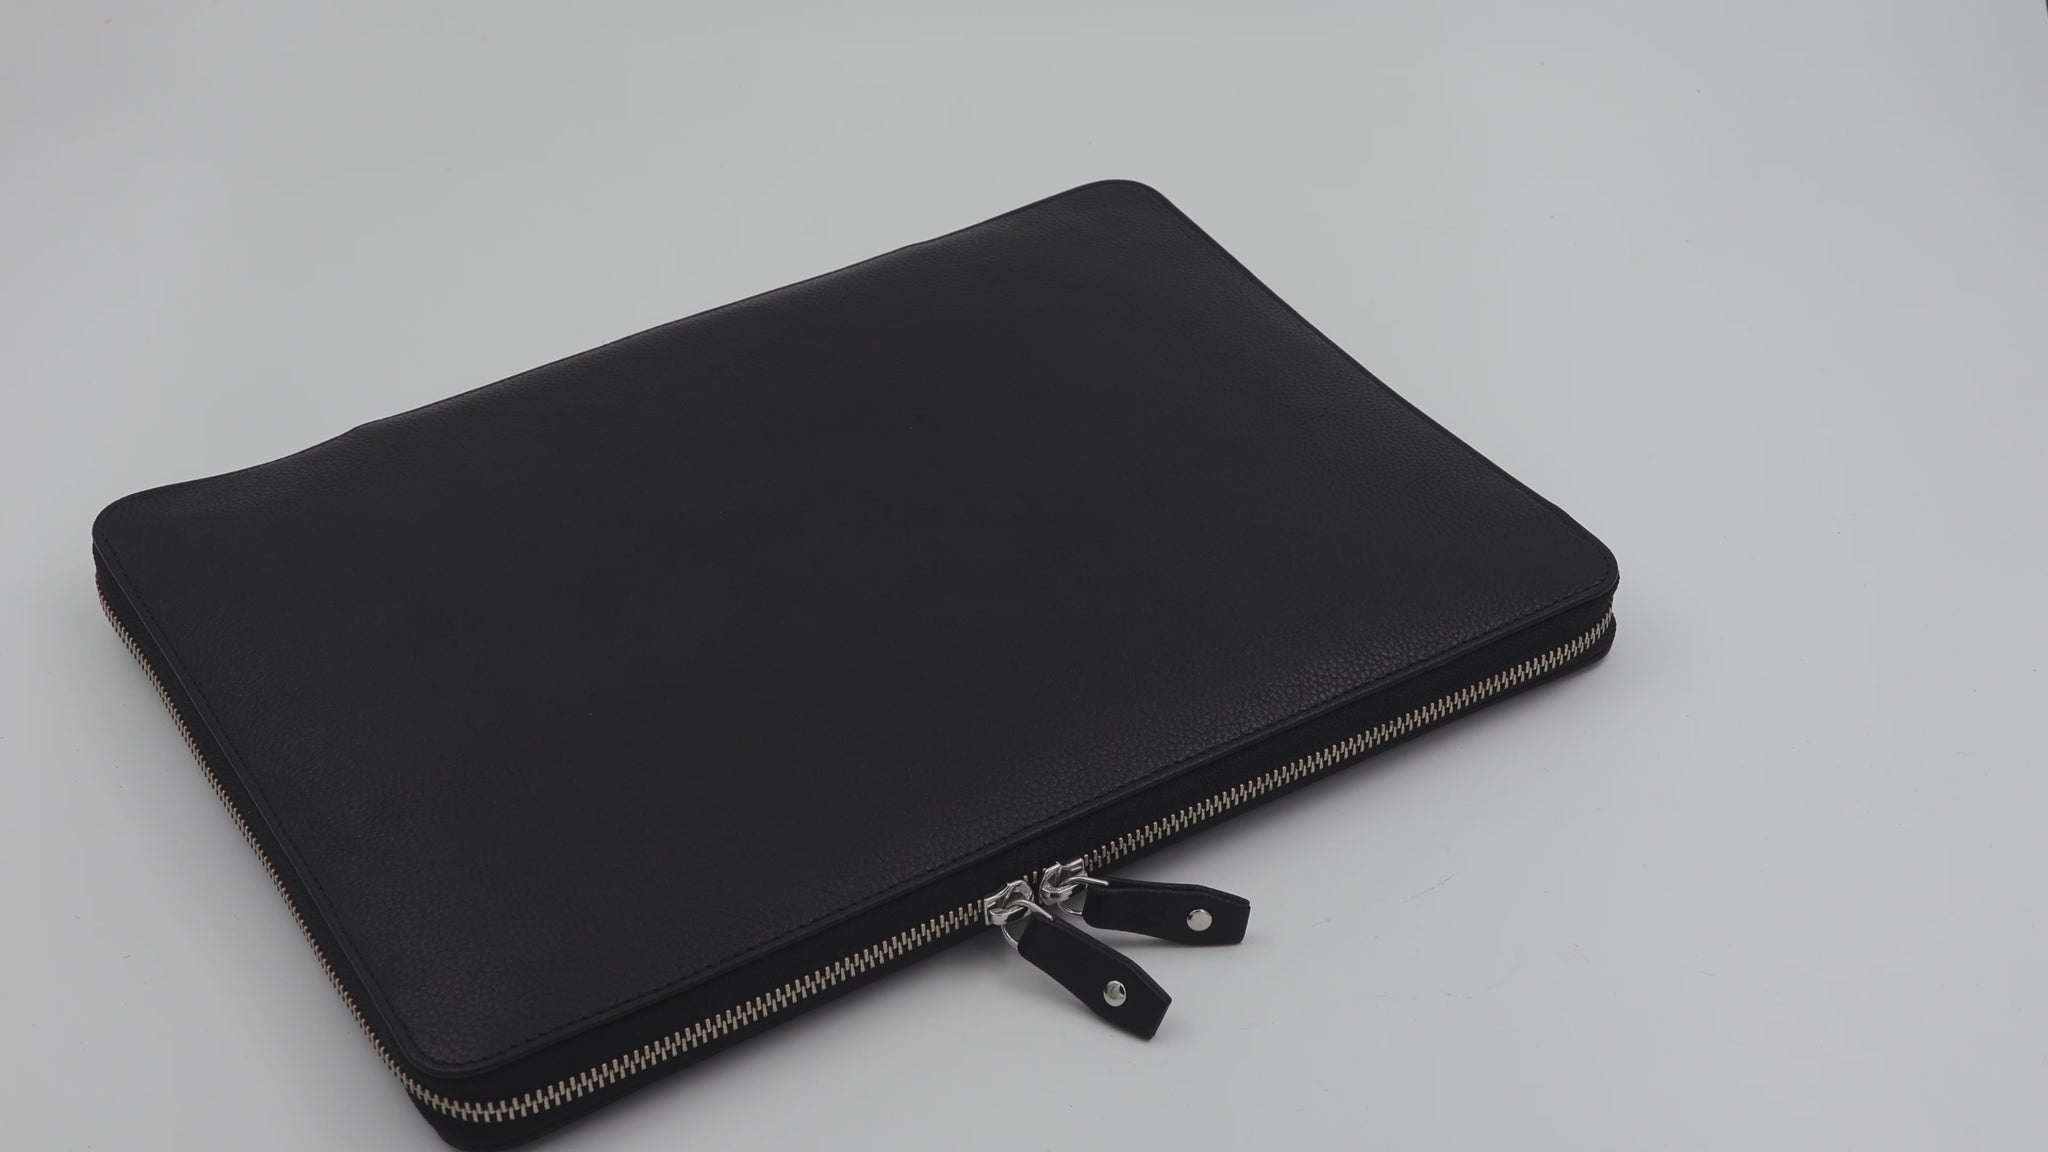 A Leather Laptop Case to carry the MacBook Air 15. Designed with a zip around closure, the case unzips to reveal a spacious interior that lays completely flat. 